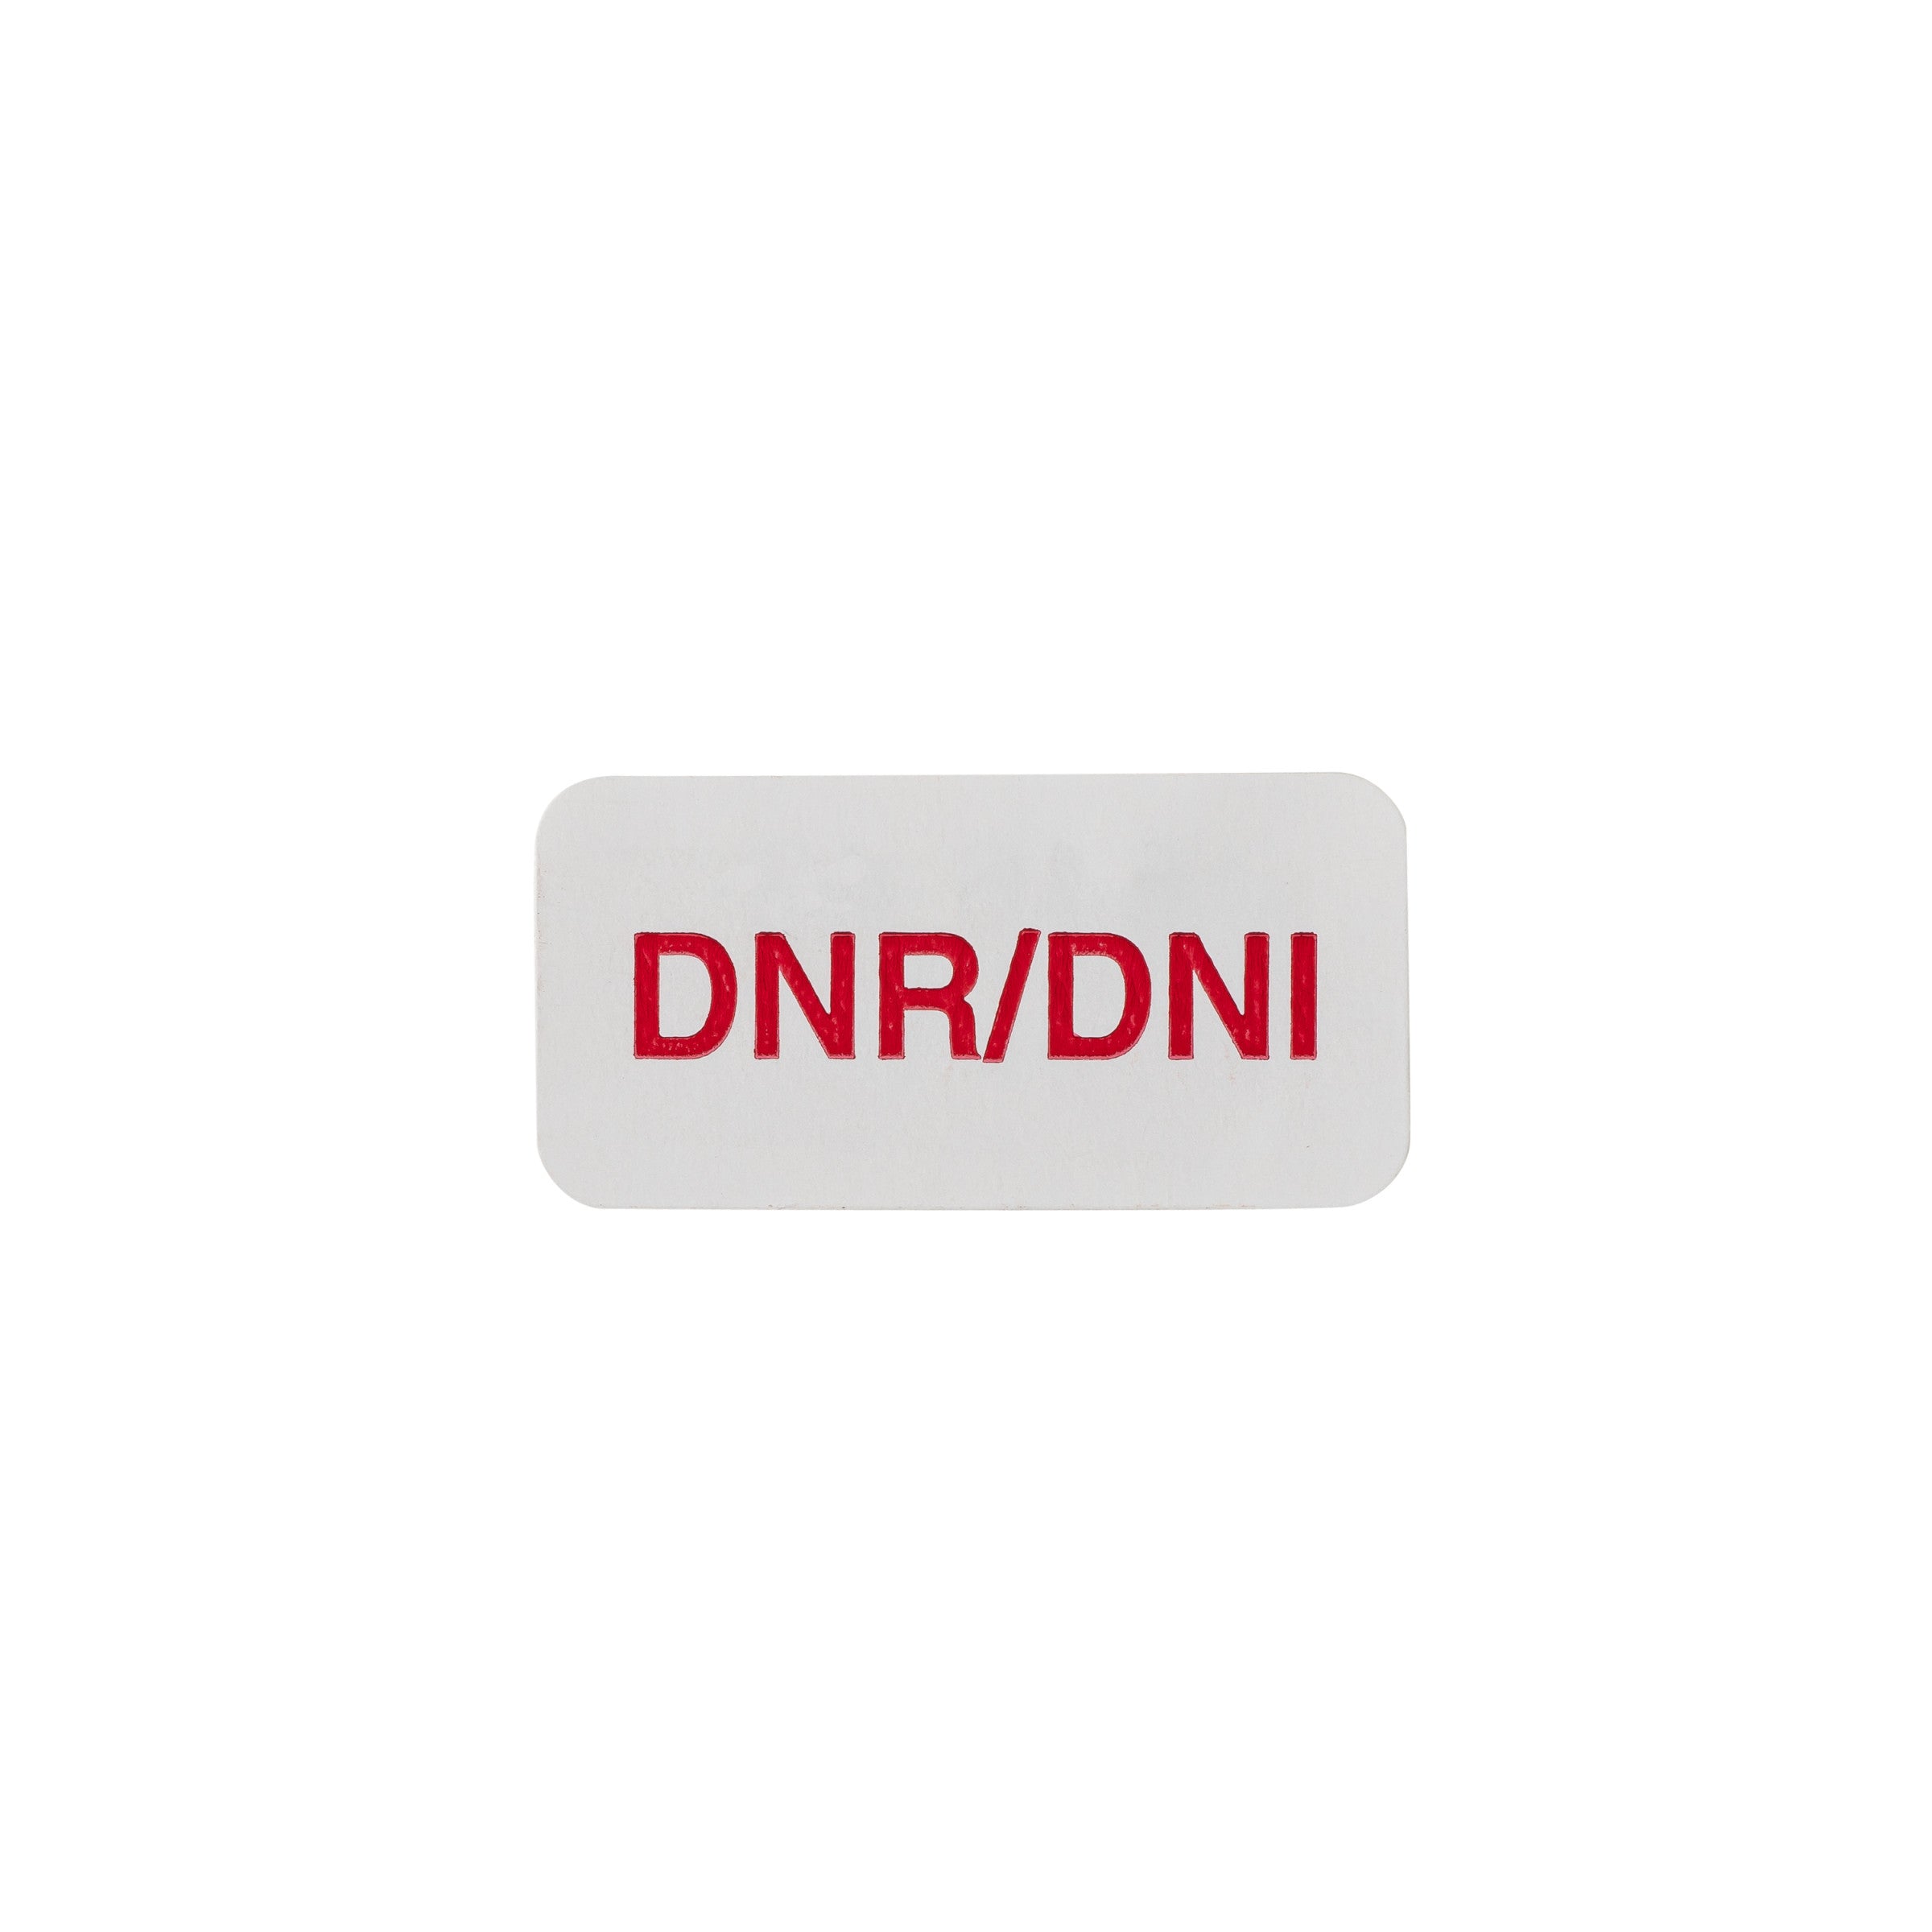 DNR/DNI Alert and Instruction Label, White, W1.5" x H.75" (Roll of 100)